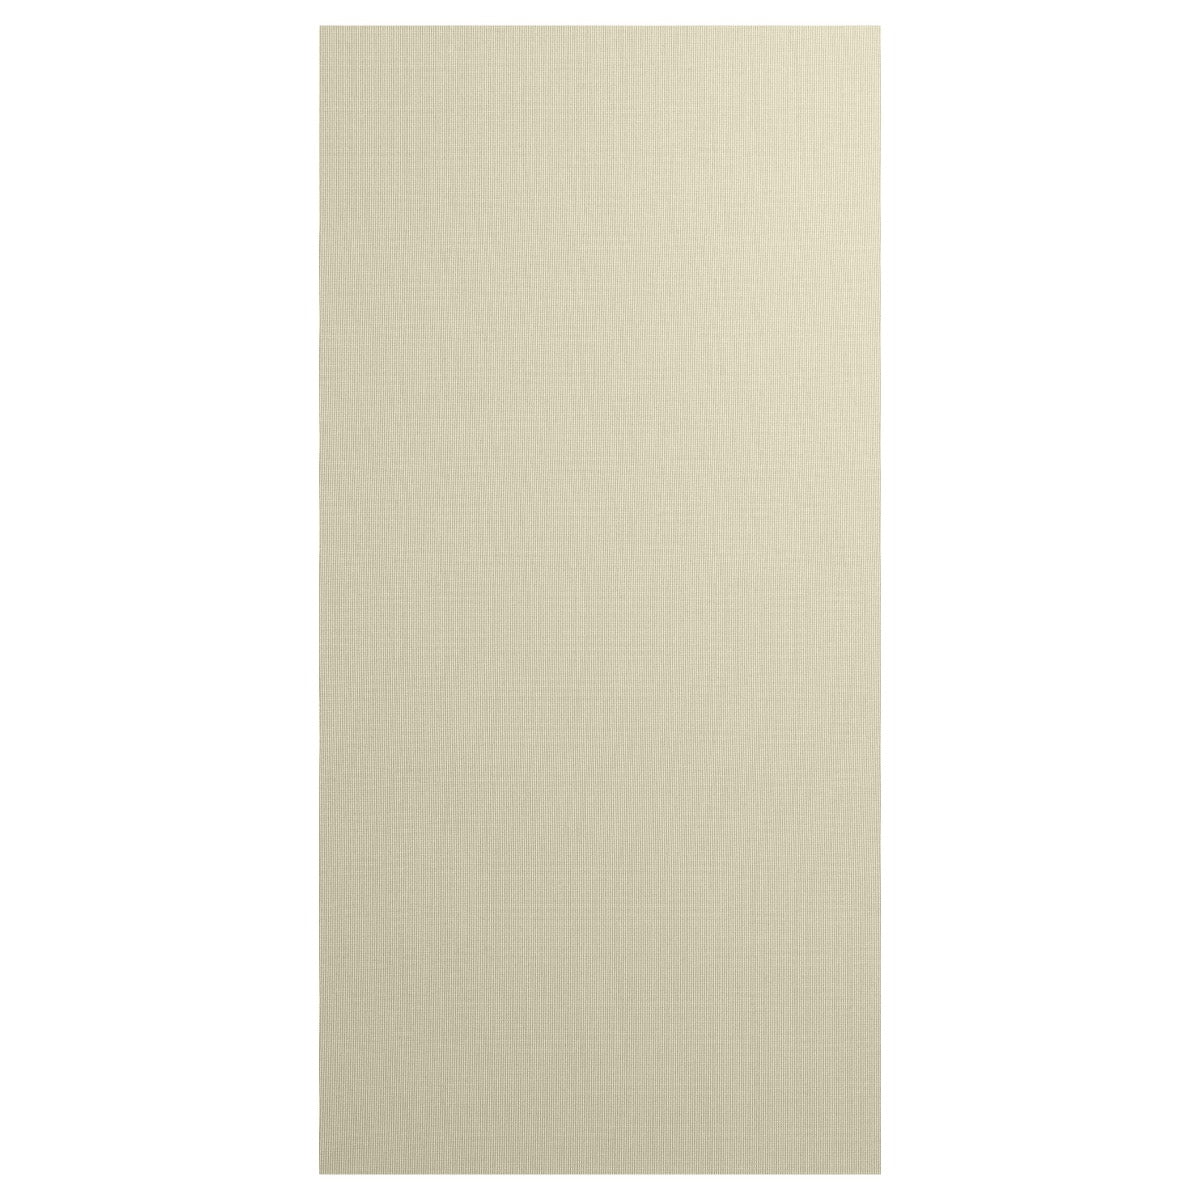 Primacoustic Broadway Fabric - Priced per linear ft - Beige - 54" Wide